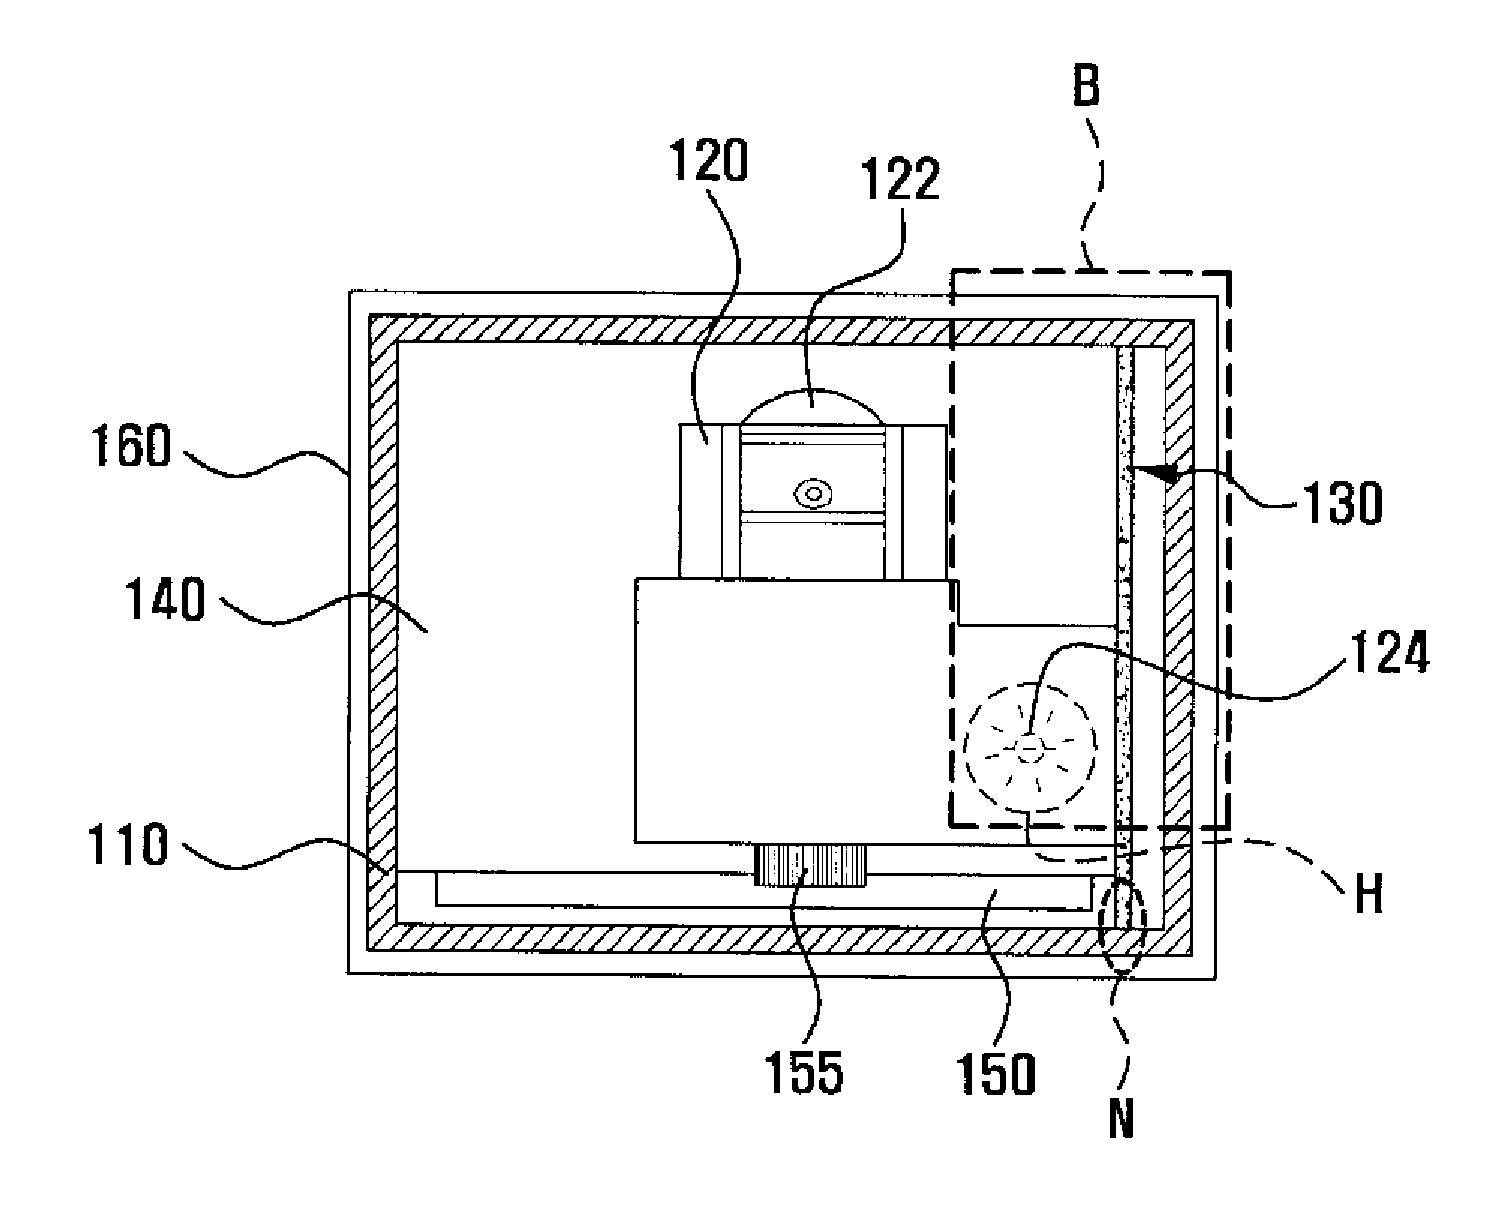 Heat radiation structure for portable projector